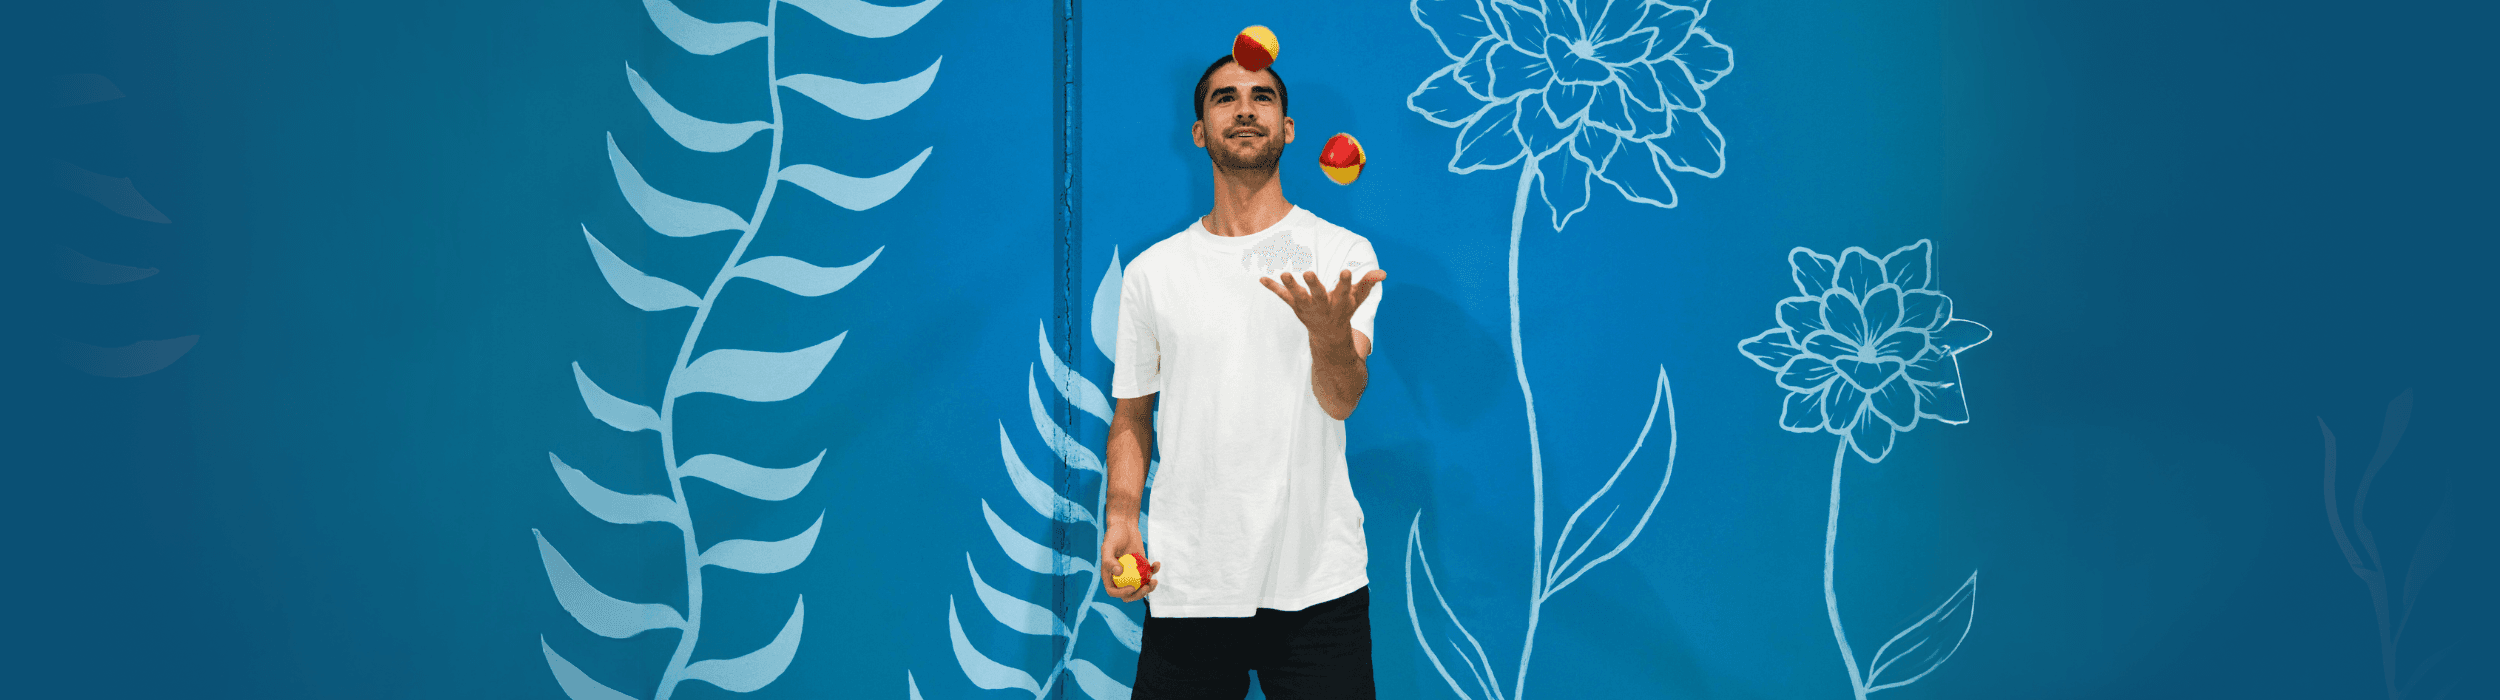 Andy juggling